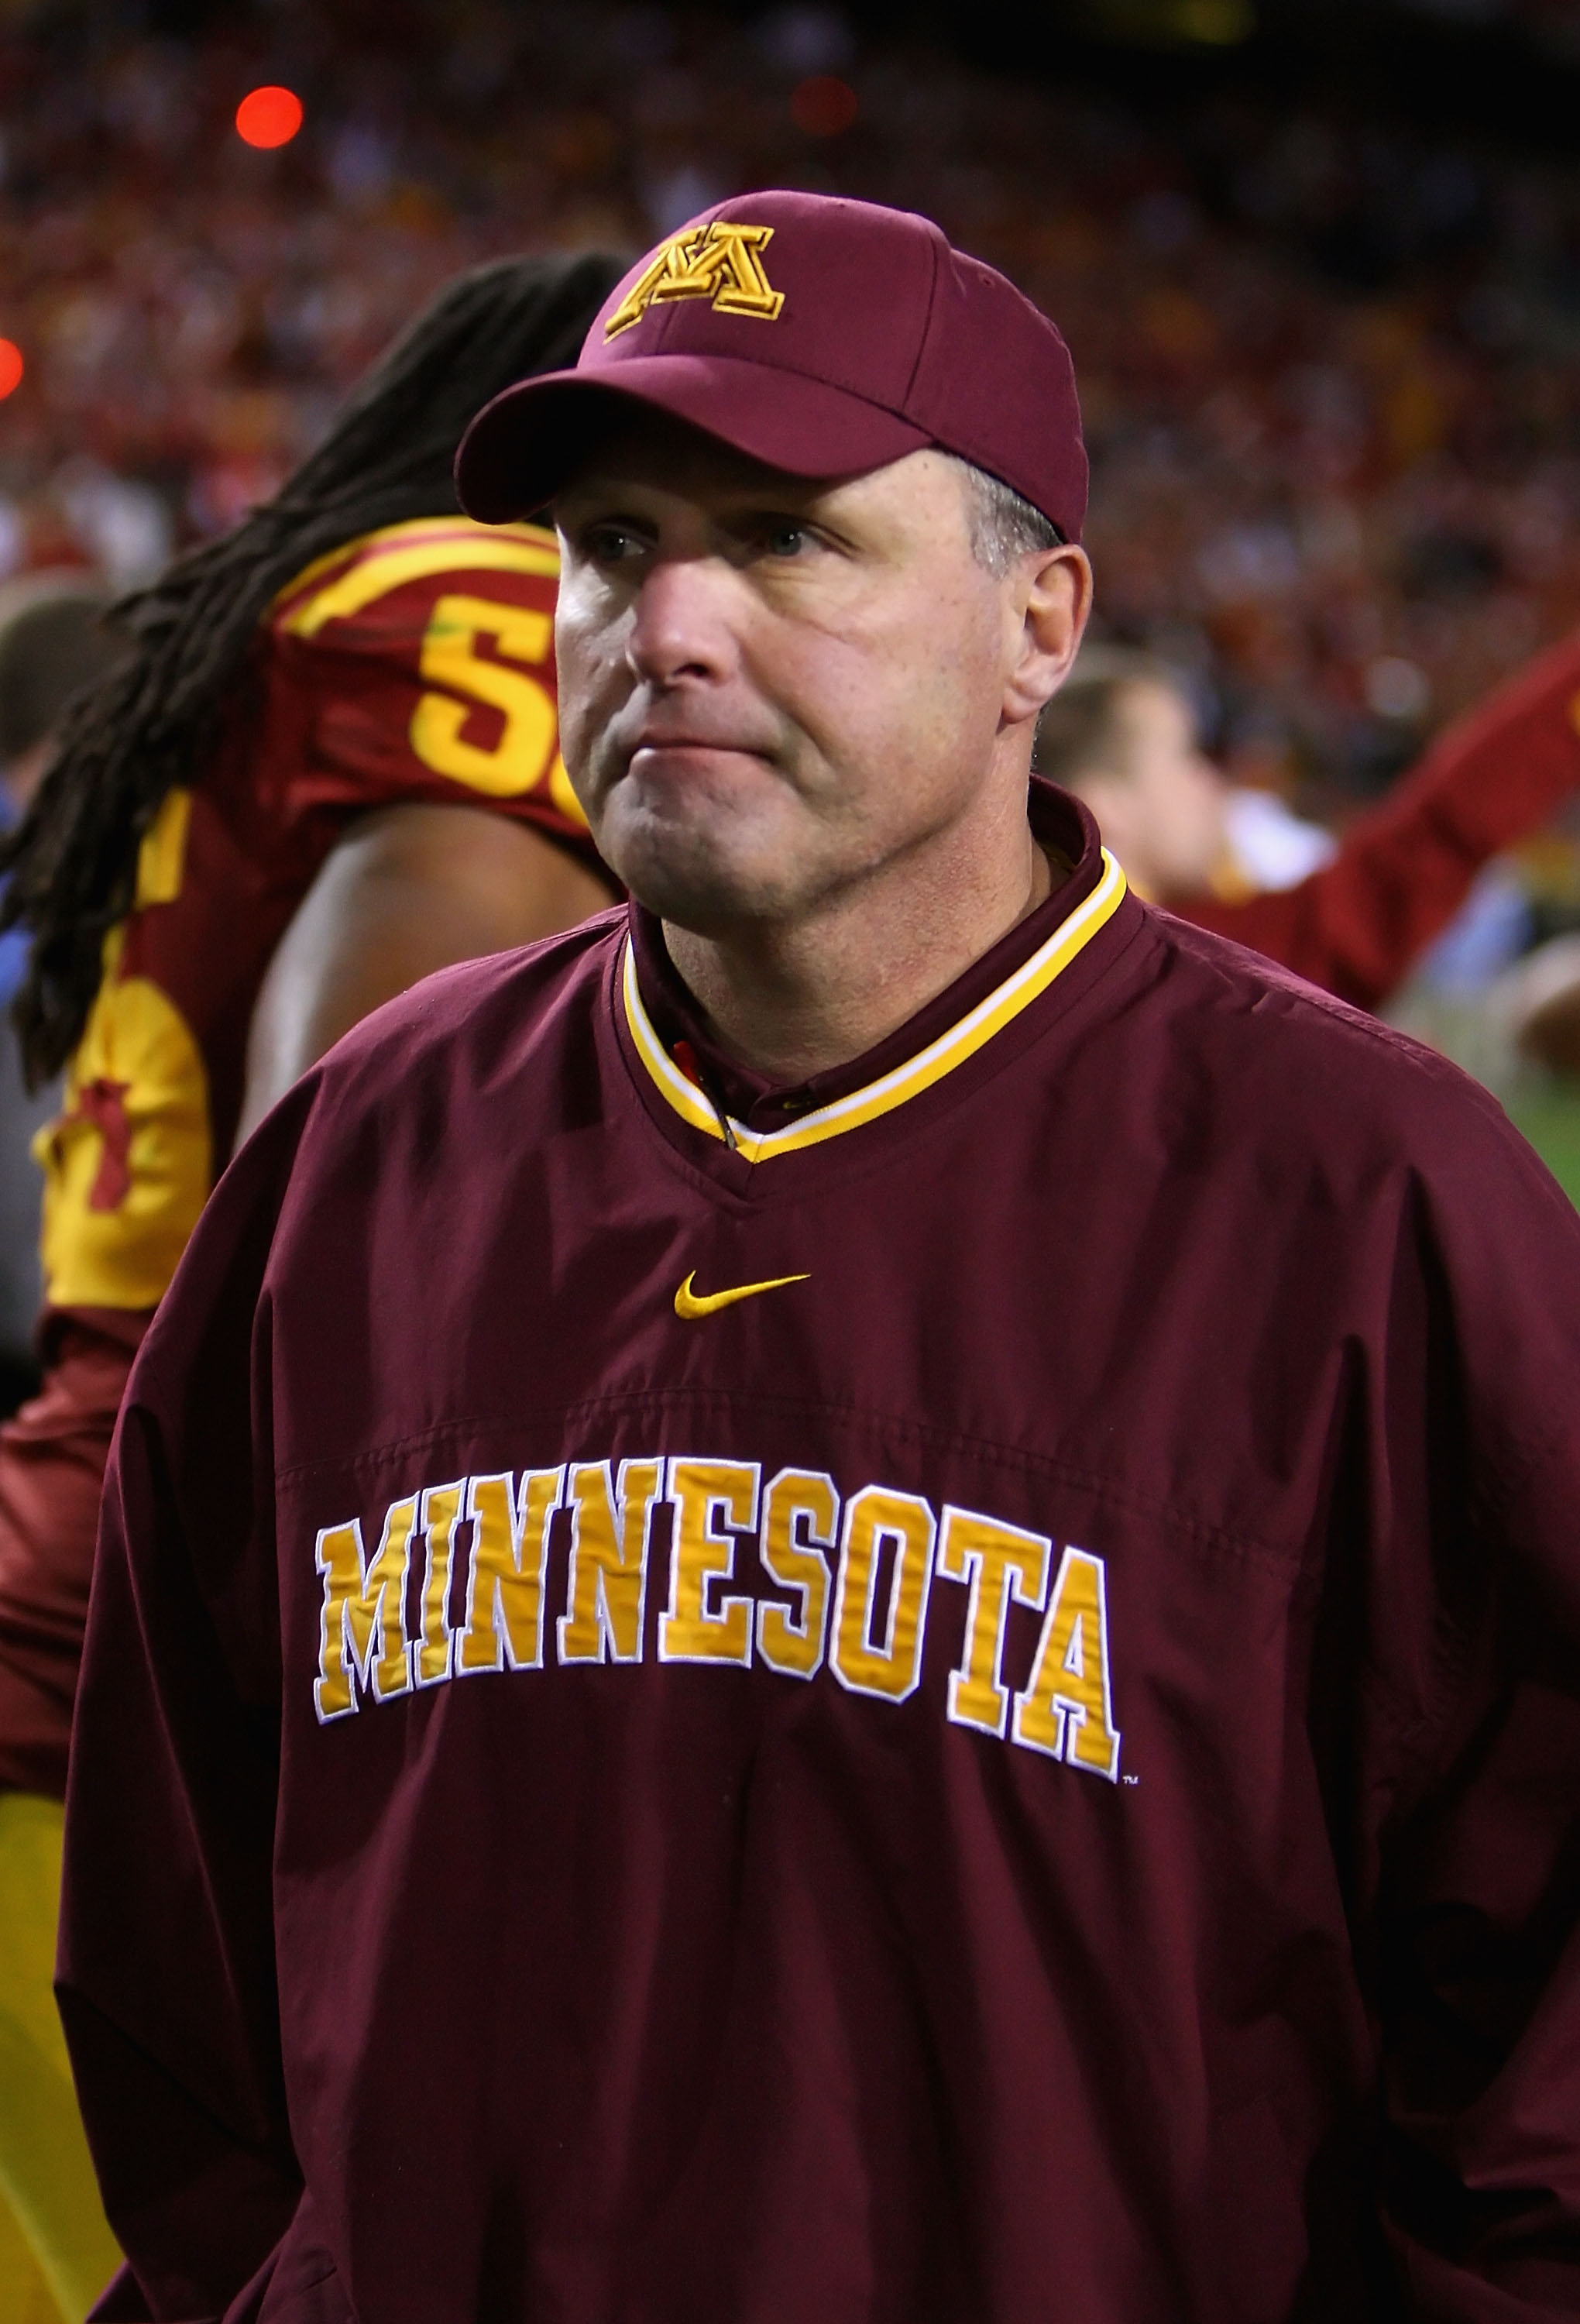 TEMPE, AZ - DECEMBER 31:  Head coach Tim Brewster of the Minnesota Golden Gophers walks off the field after being defeated by the Iowa State Cyclones in the Insight Bowl at Arizona Stadium on December 31, 2009 in Tempe, Arizona. The Cyclones defeated the